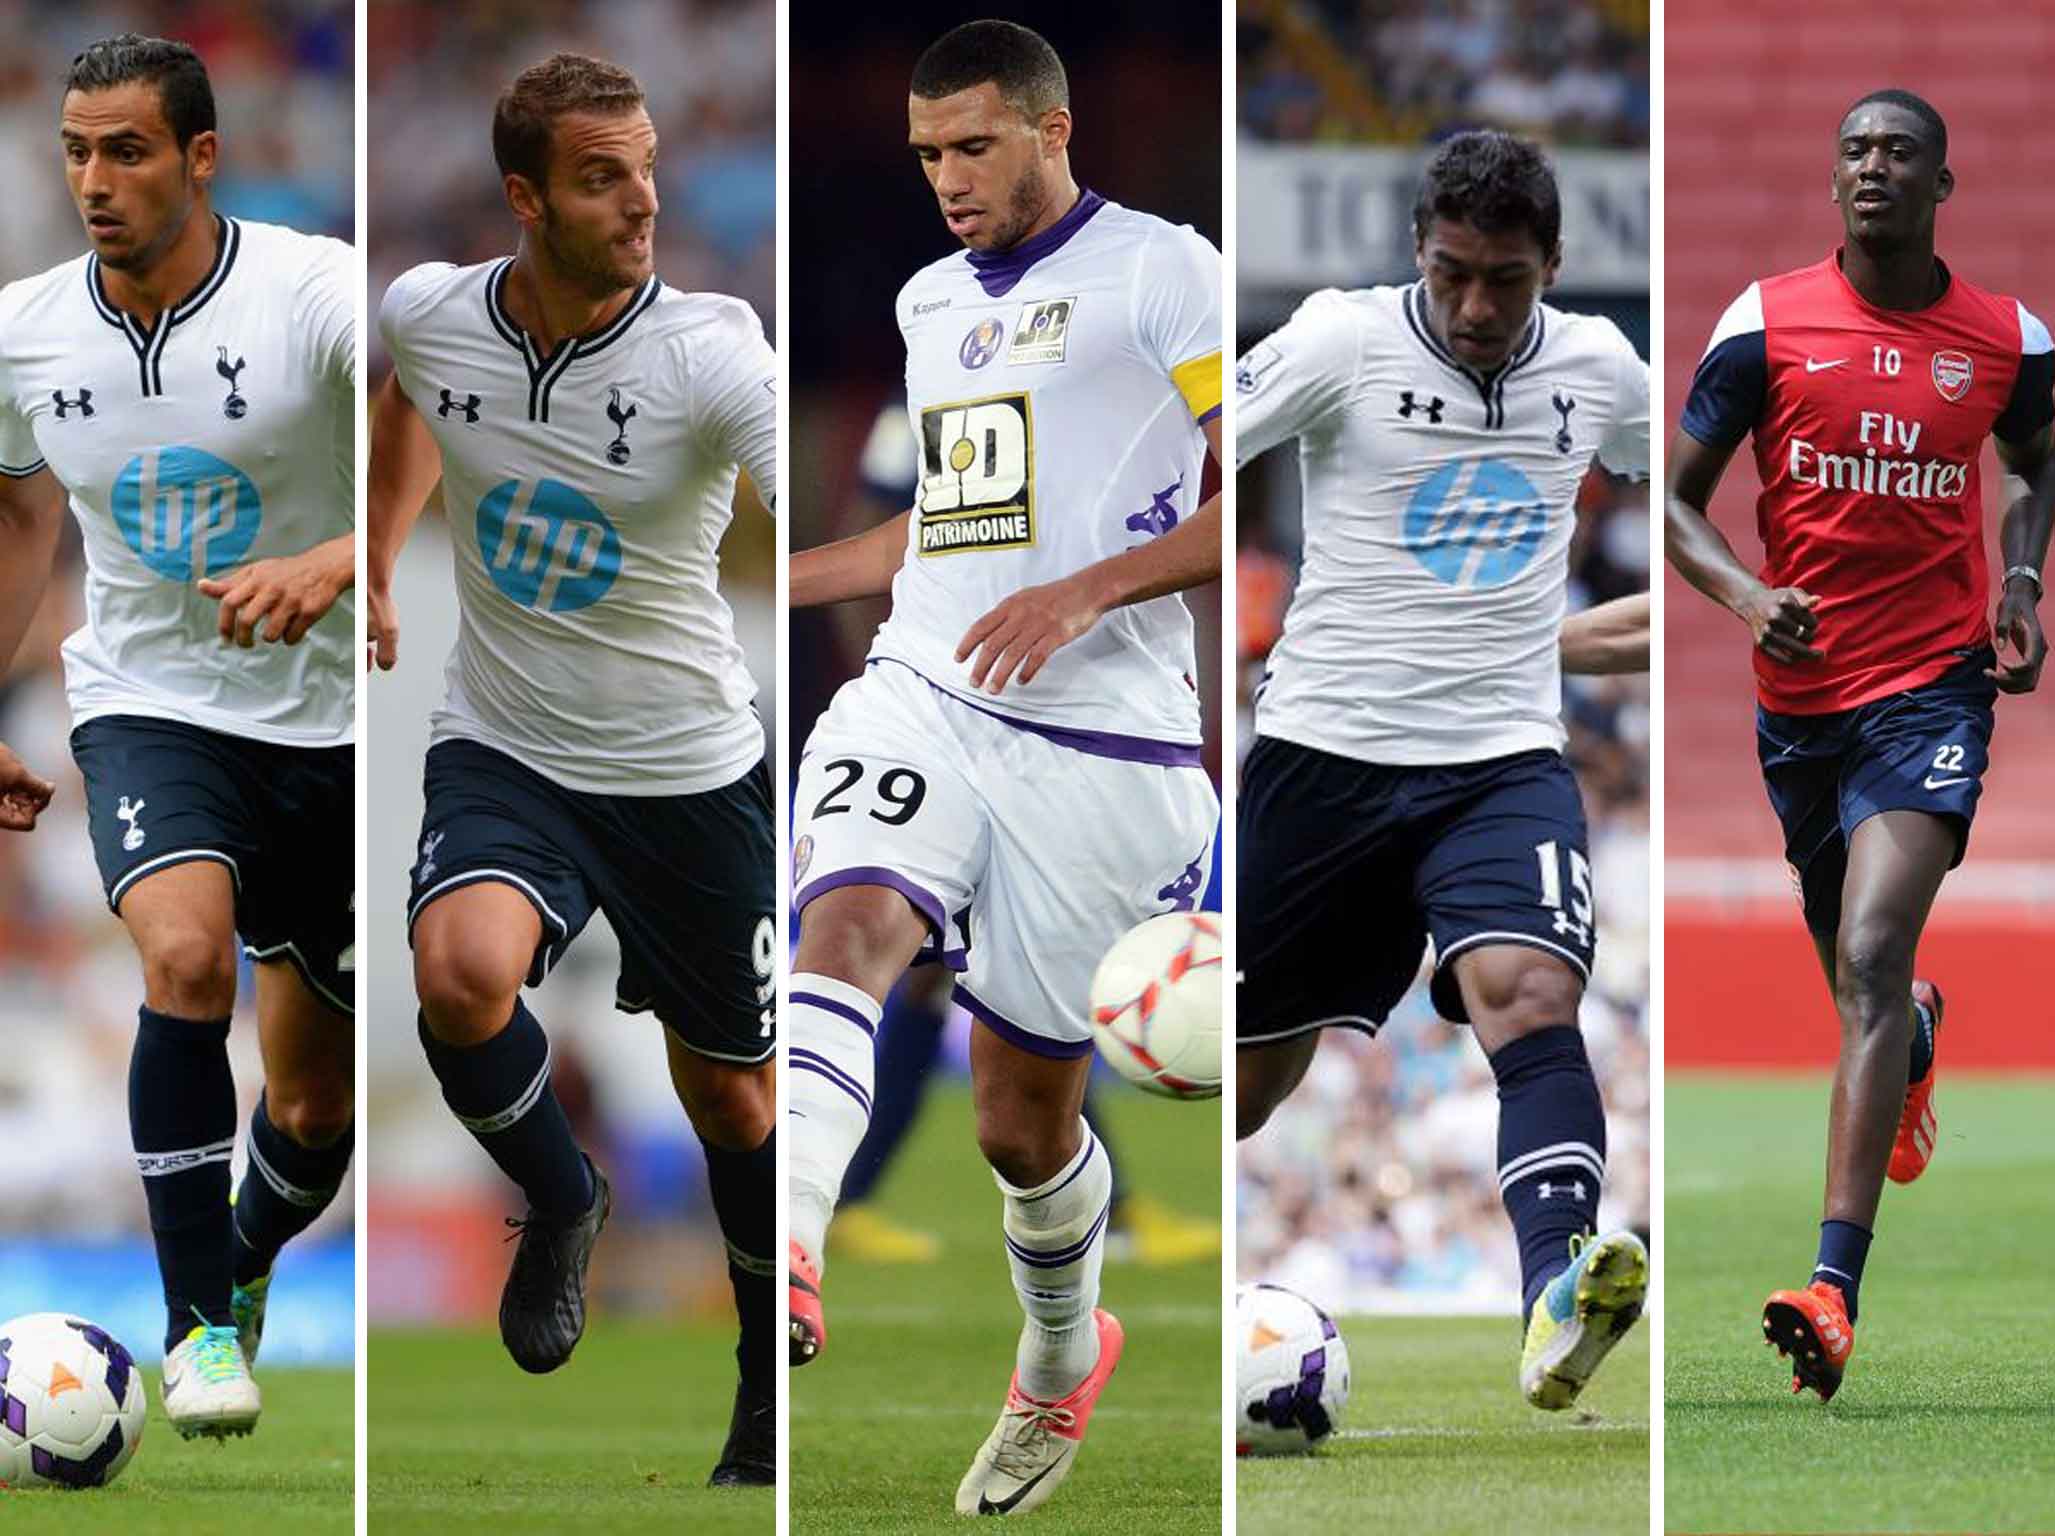 Spurs signings from left, Nacer Chadli, Roberto Soldado, Etienne Capoue, Paulinho. Arsenal's sole signing this summer has been Yaya Sanogo, far right